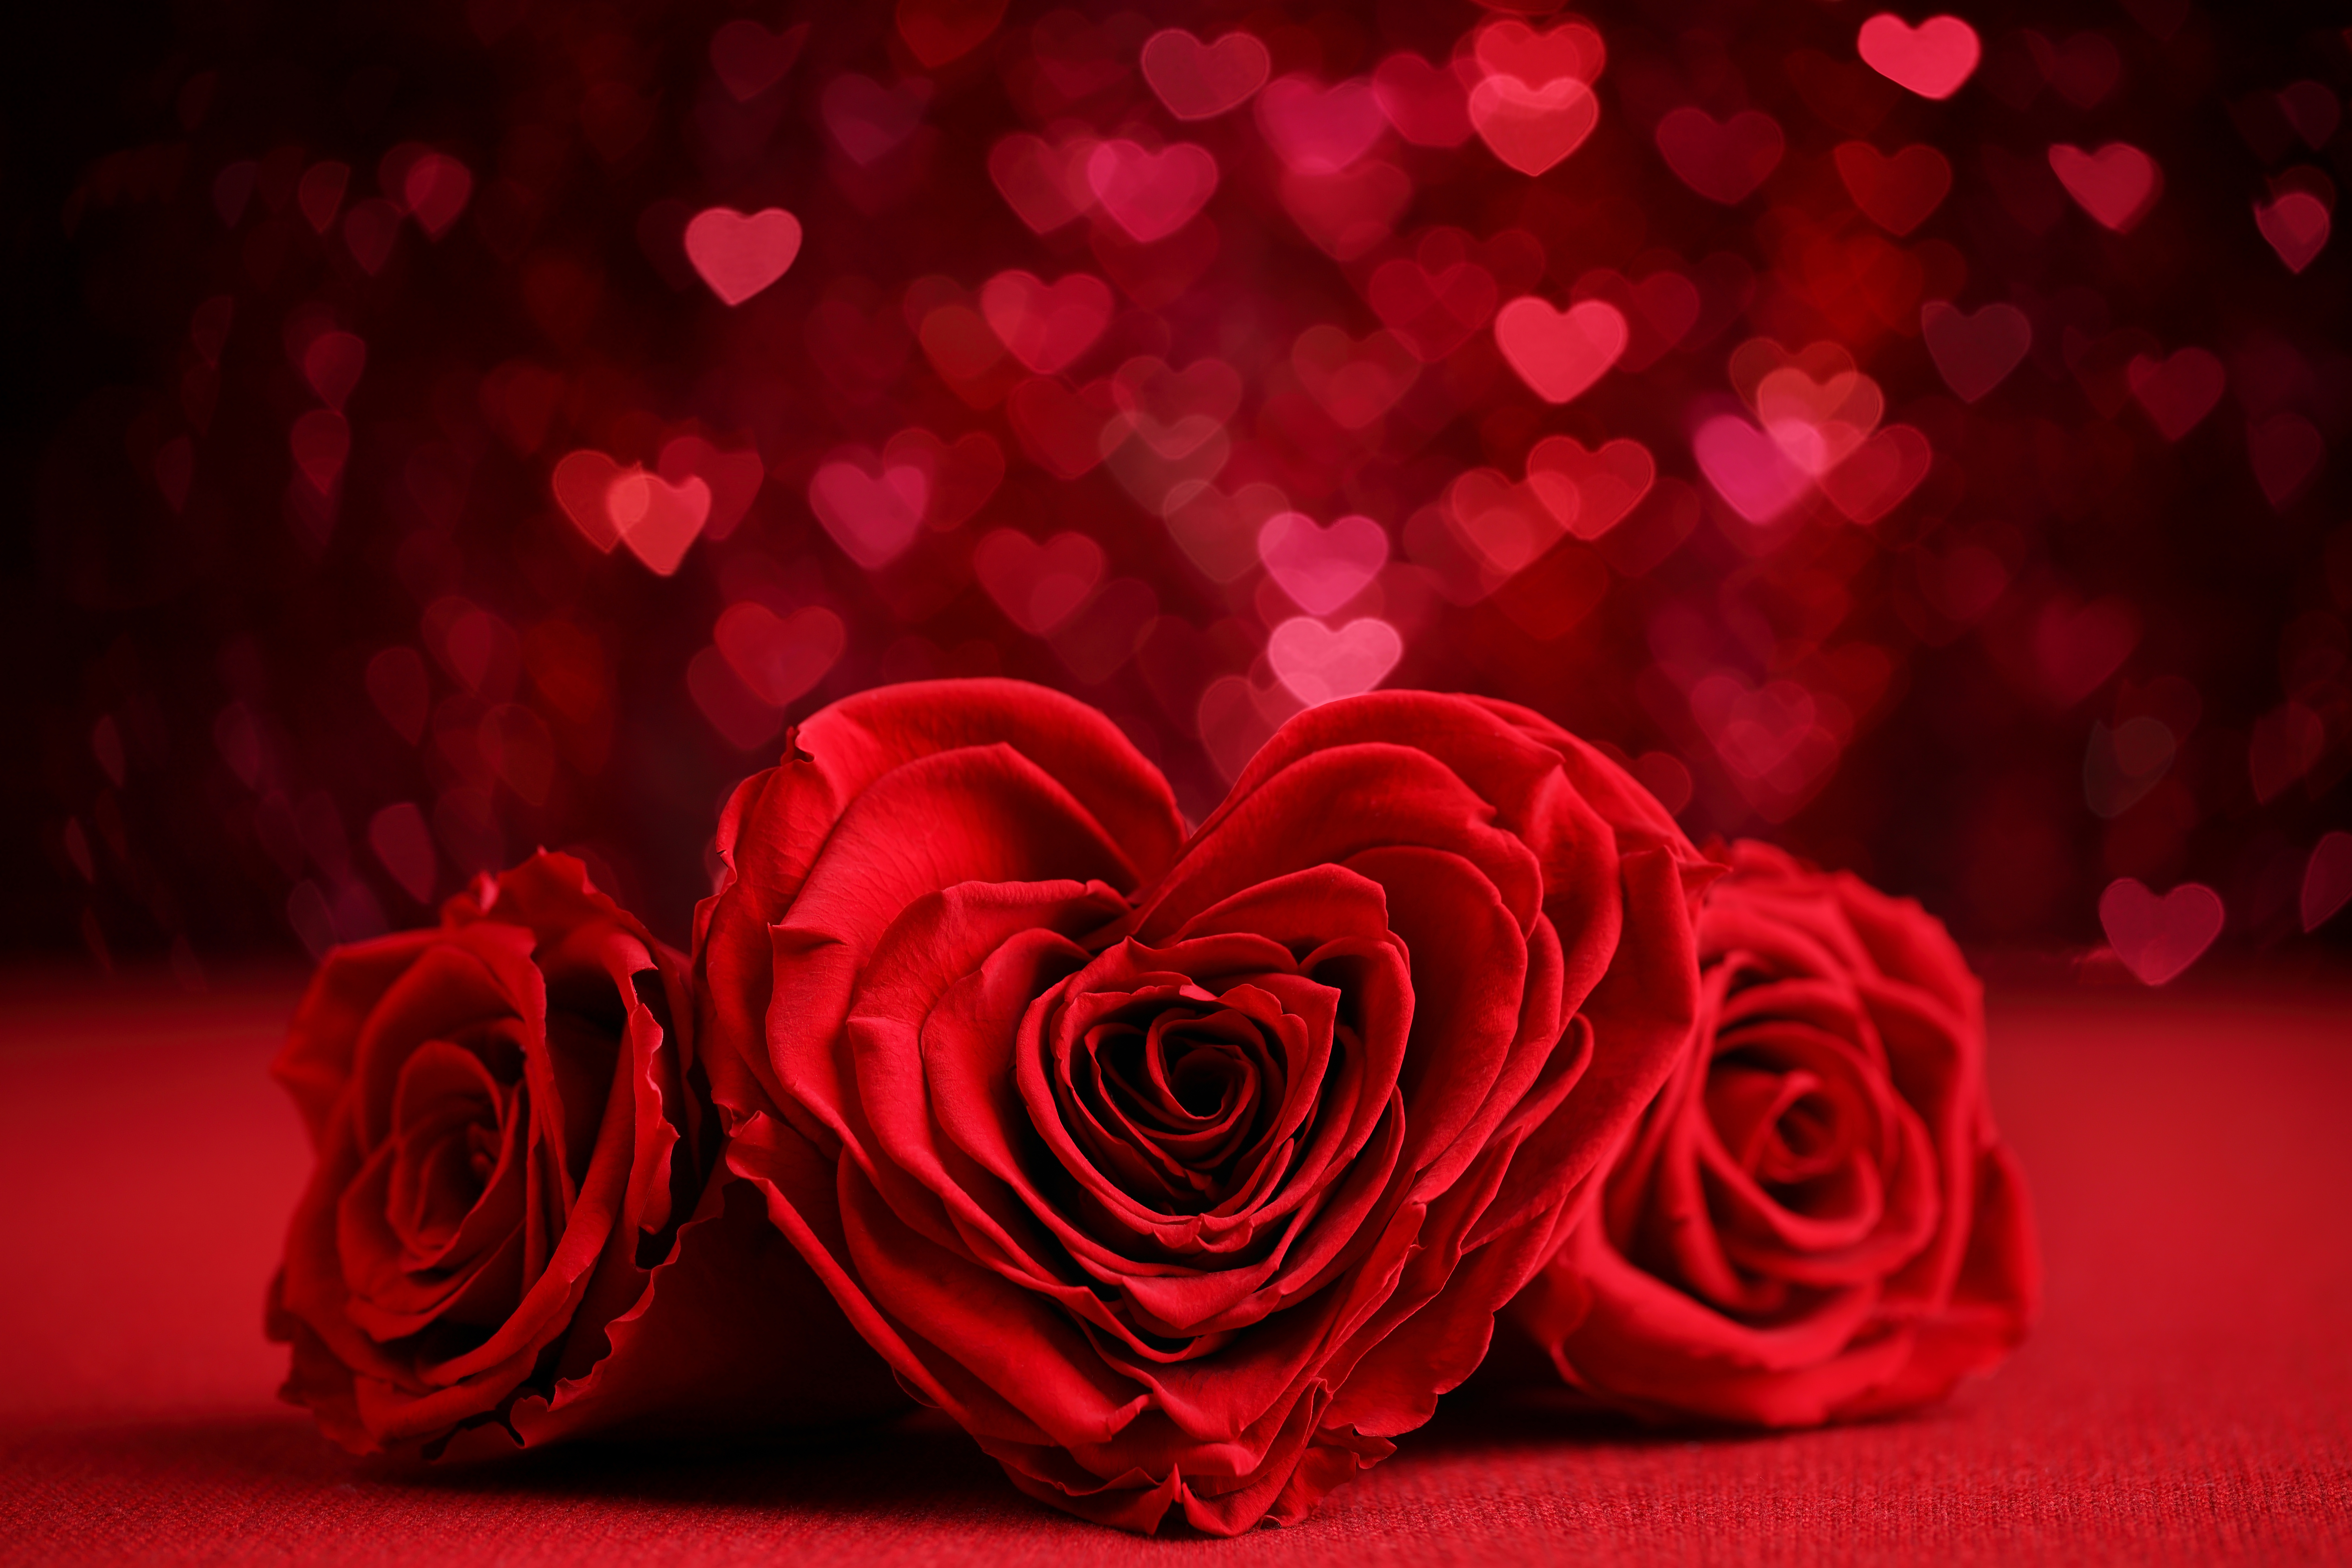 red flower, red rose, red, flower, valentine's day, holiday, bokeh, heart shaped, romantic, rose